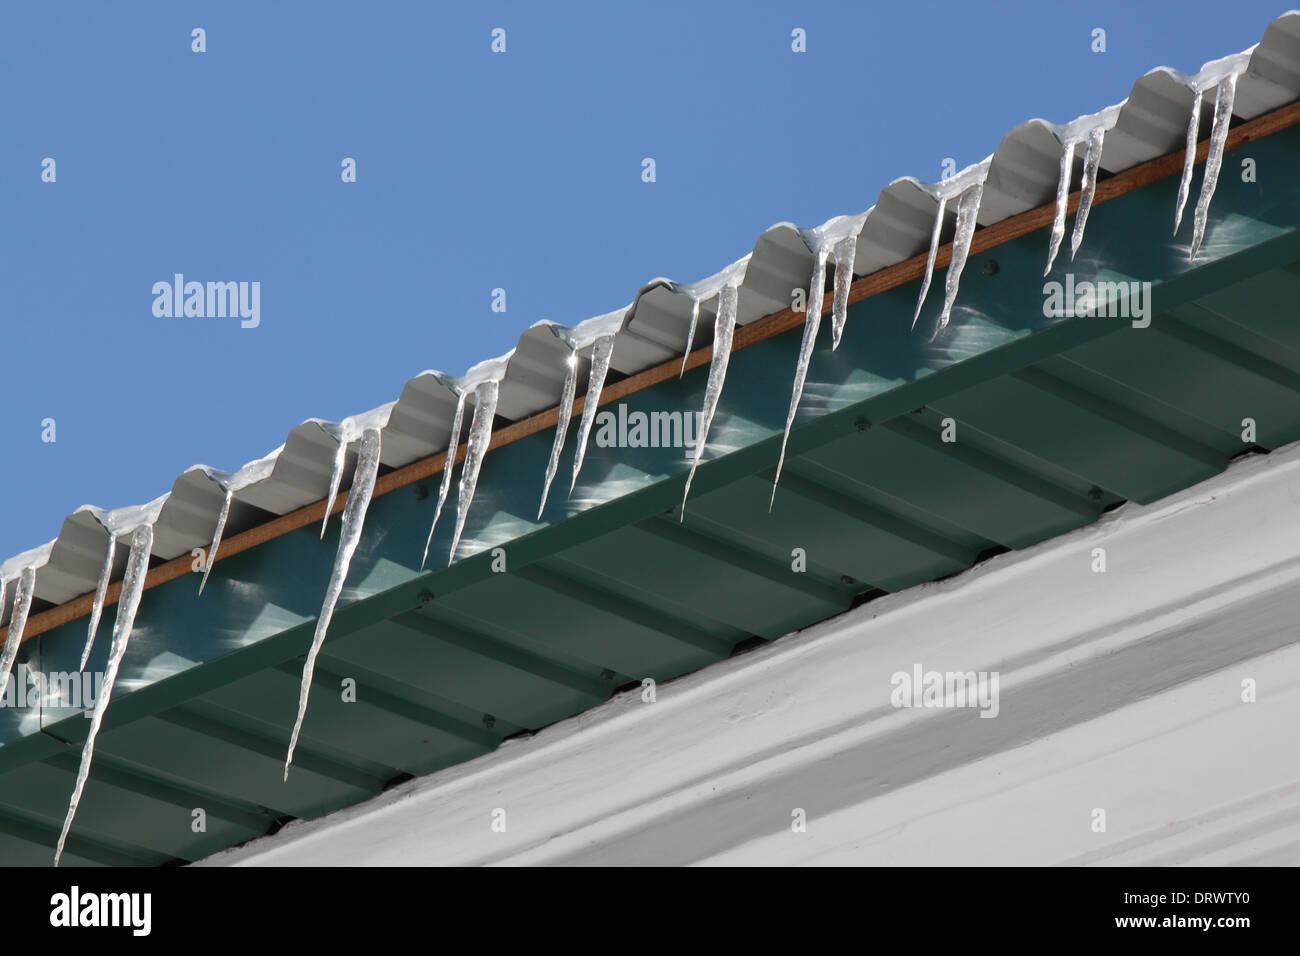 icicles on roof of building Stock Photo